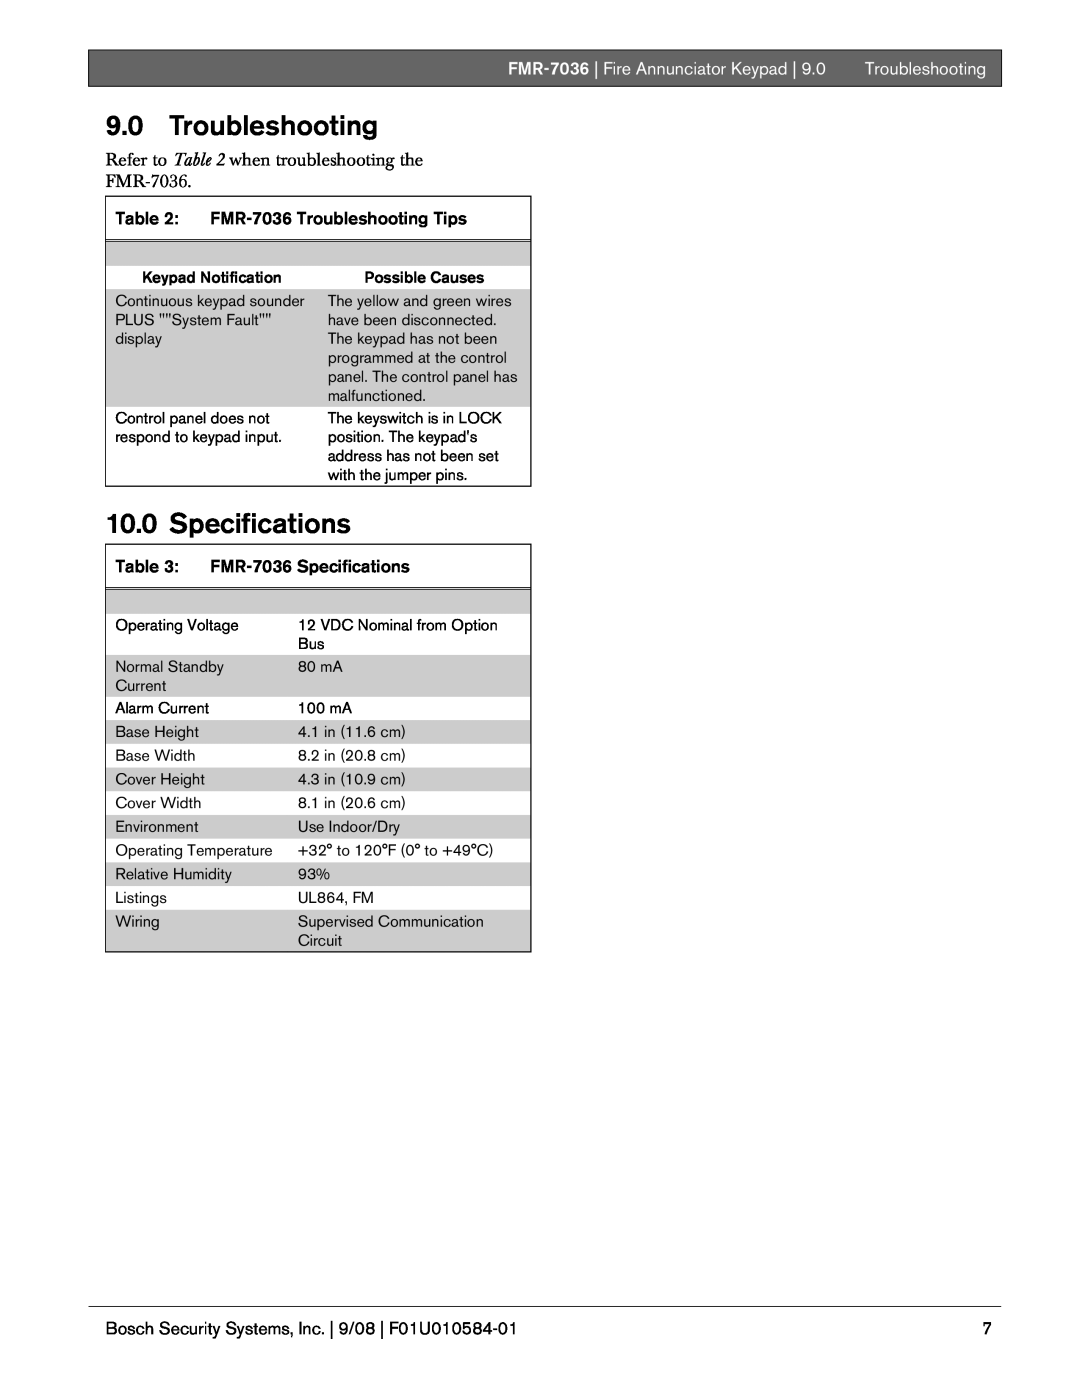 Bosch Appliances FMR-7036Troubleshooting Tips, FMR-7036Specifications, FMR-7036| Fire Annunciator Keypad 